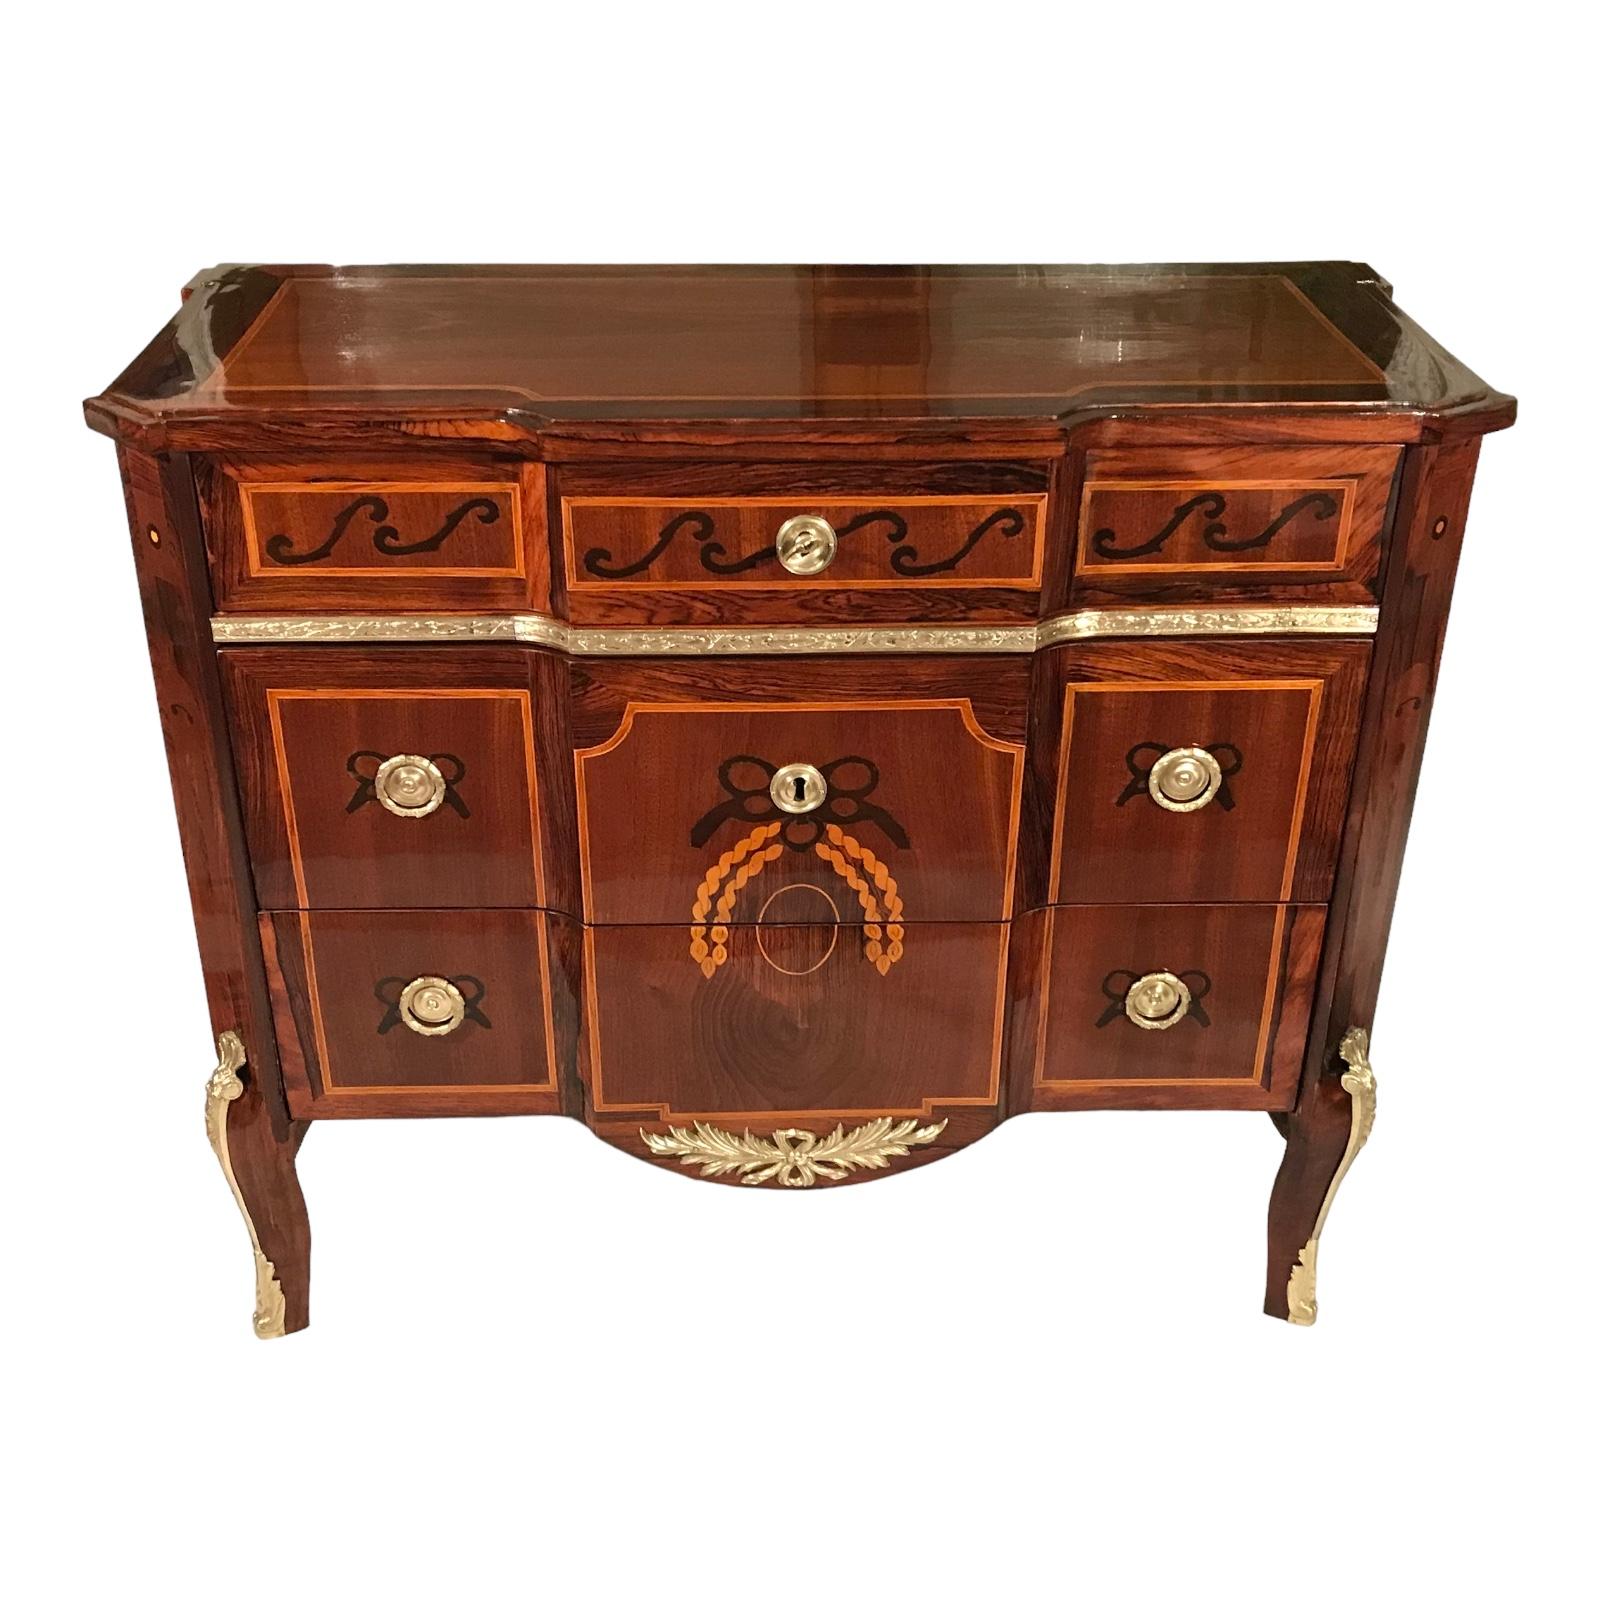 This gorgeous French Louis XV chest of drawers dates back to around 1770. It was made during the so called Transition period, the time between Louis XV and Louis XVI. It already shows the plain and stricter design of the Louis XVI period, but has